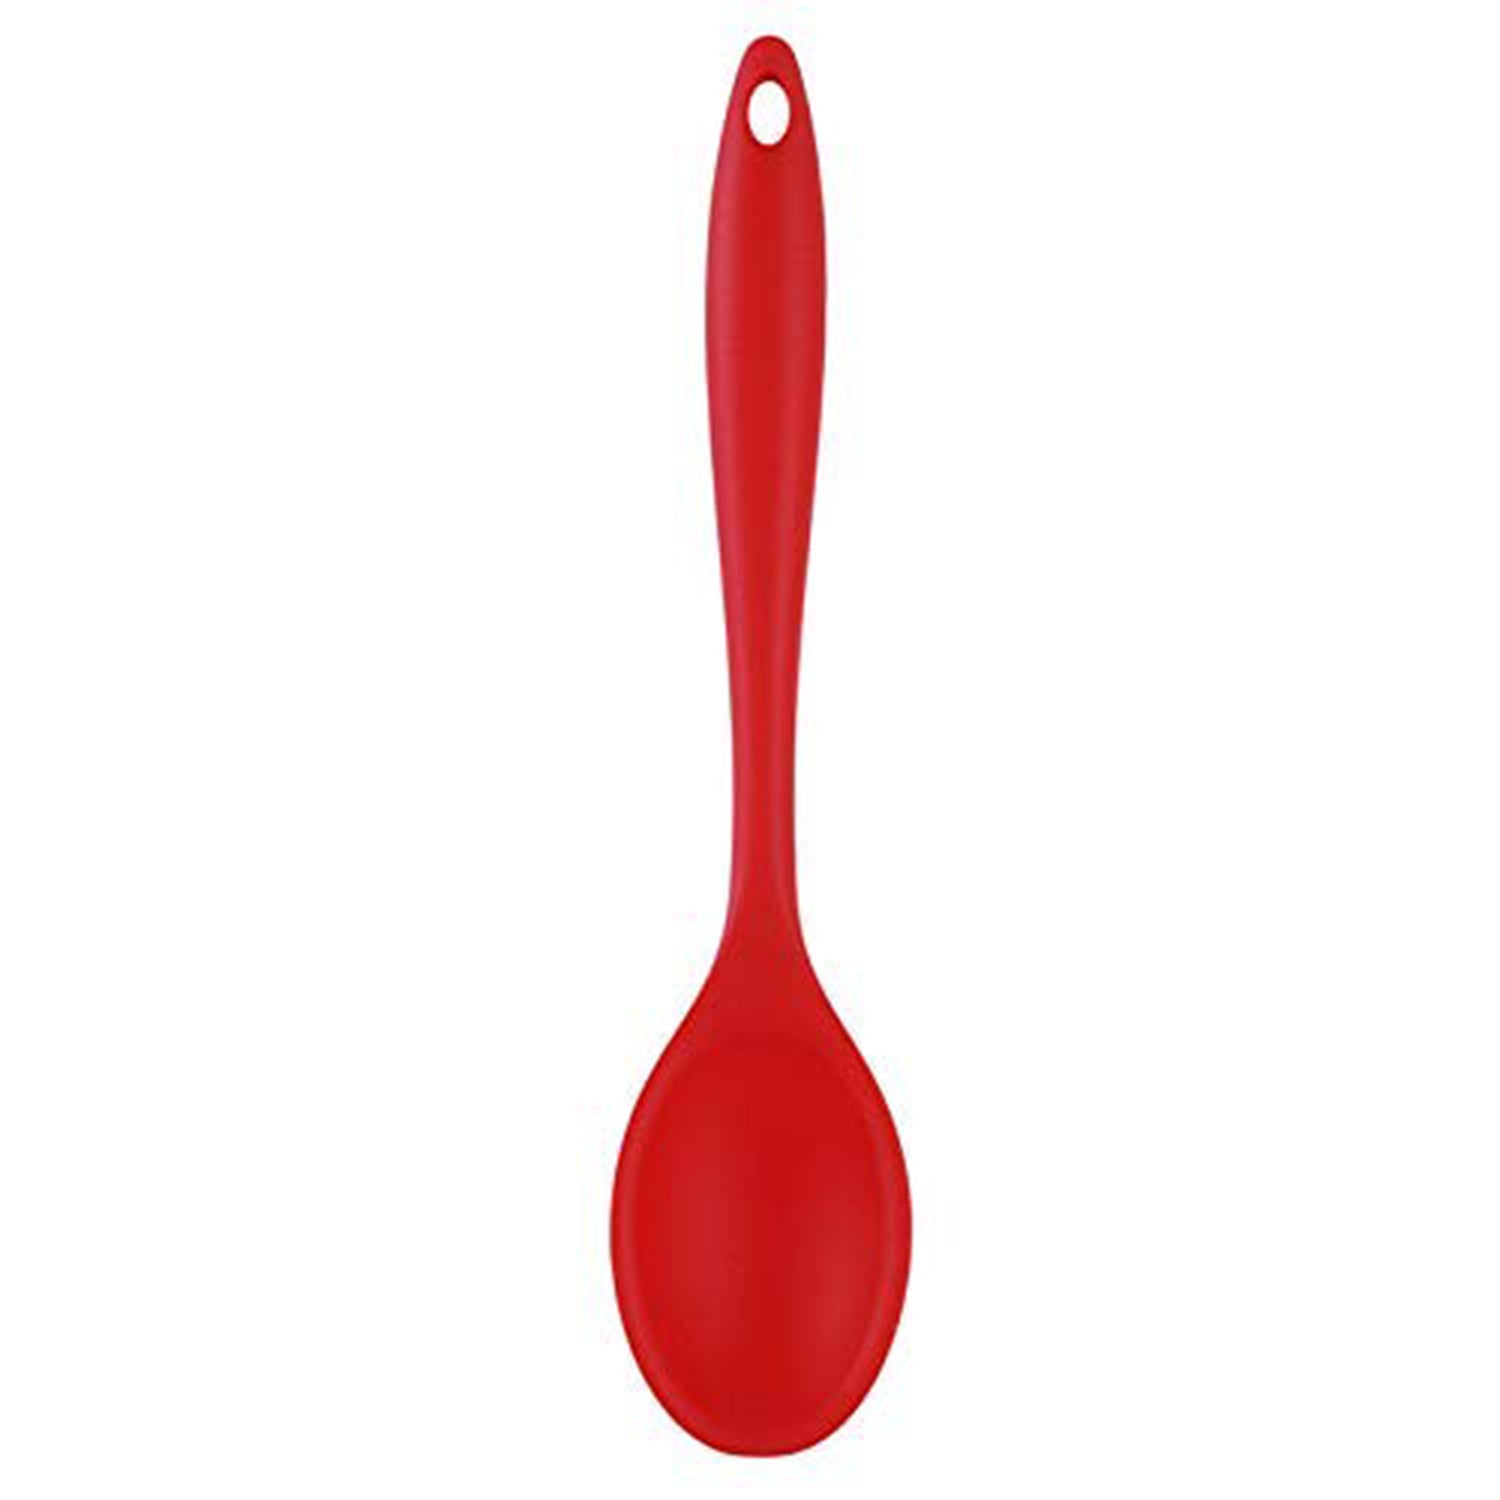 2101 Non-Stick Small Silicone Stainless Steel with Silicone Coating Spatula spoon. DeoDap